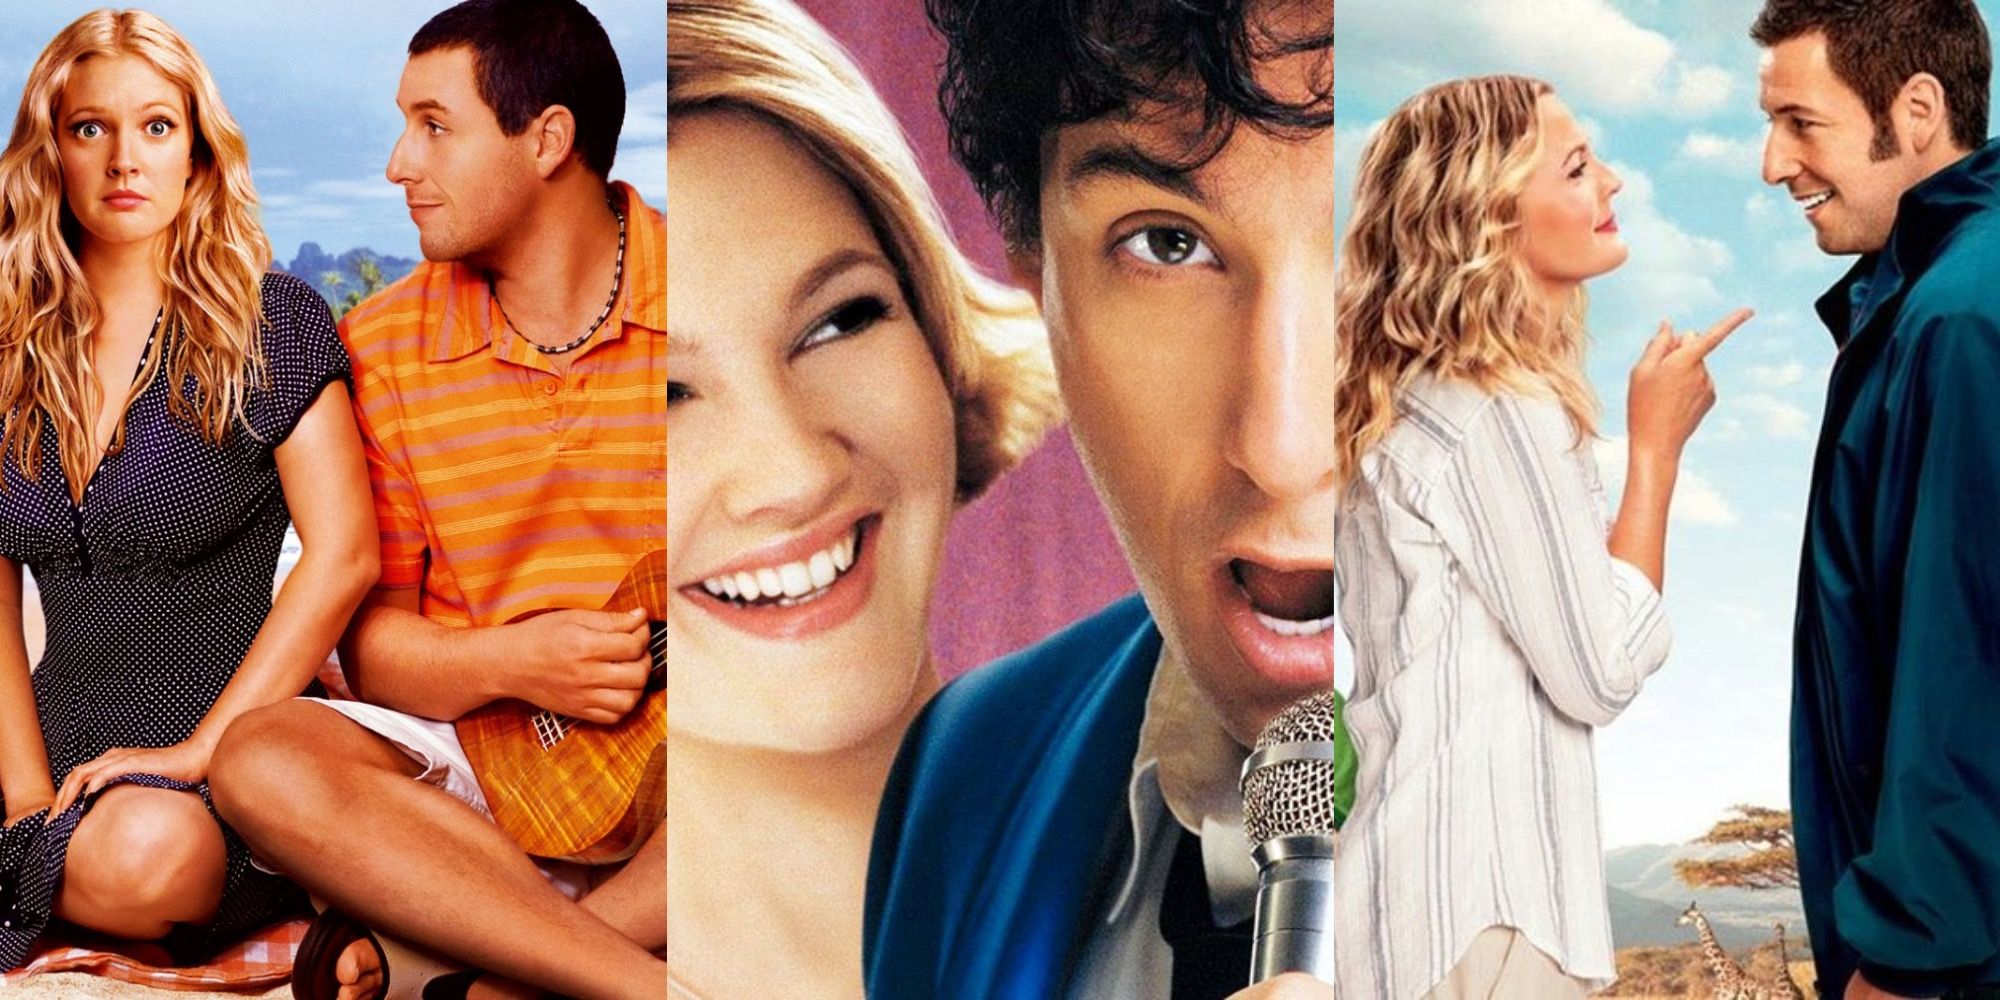 Adam Sandler and Drew Barrymore in The Wedding Singer, Blended, and 50 First Dates